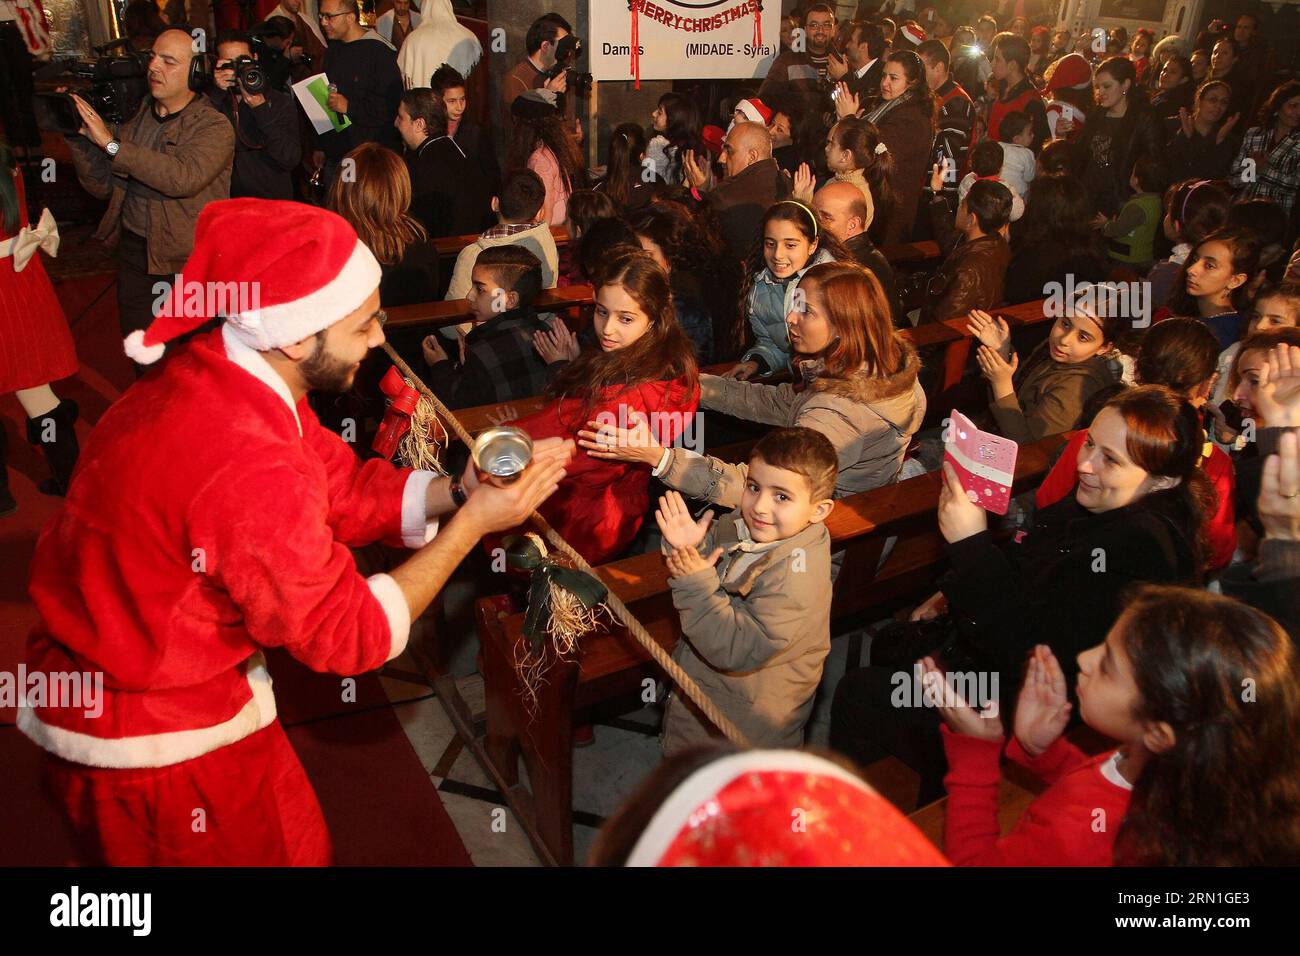 (141230) -- DAMASCUS, Dec. 30, 2014 -- People watch the performance during the Christmas celebration at al-Zaitoun Cathedral in Damascus, capital of Syria, on Dec. 30, 2014. About 1,500 Syrian Christian kids and their parents gathered at al-Zaitoun Cathedral in Syria s capital Damascus to take part in a Christmas celebration. About 10 percent of population in Syria are Christian, who suffered persecution in some parts of the country by the hands of the extremist groups. )(zhf) SYRIA-DAMASCUS-CHRISTIAN-CHRISTMAS CELEBRATION bassemxtellawi PUBLICATIONxNOTxINxCHN   Damascus DEC 30 2014 Celebritie Stock Photo